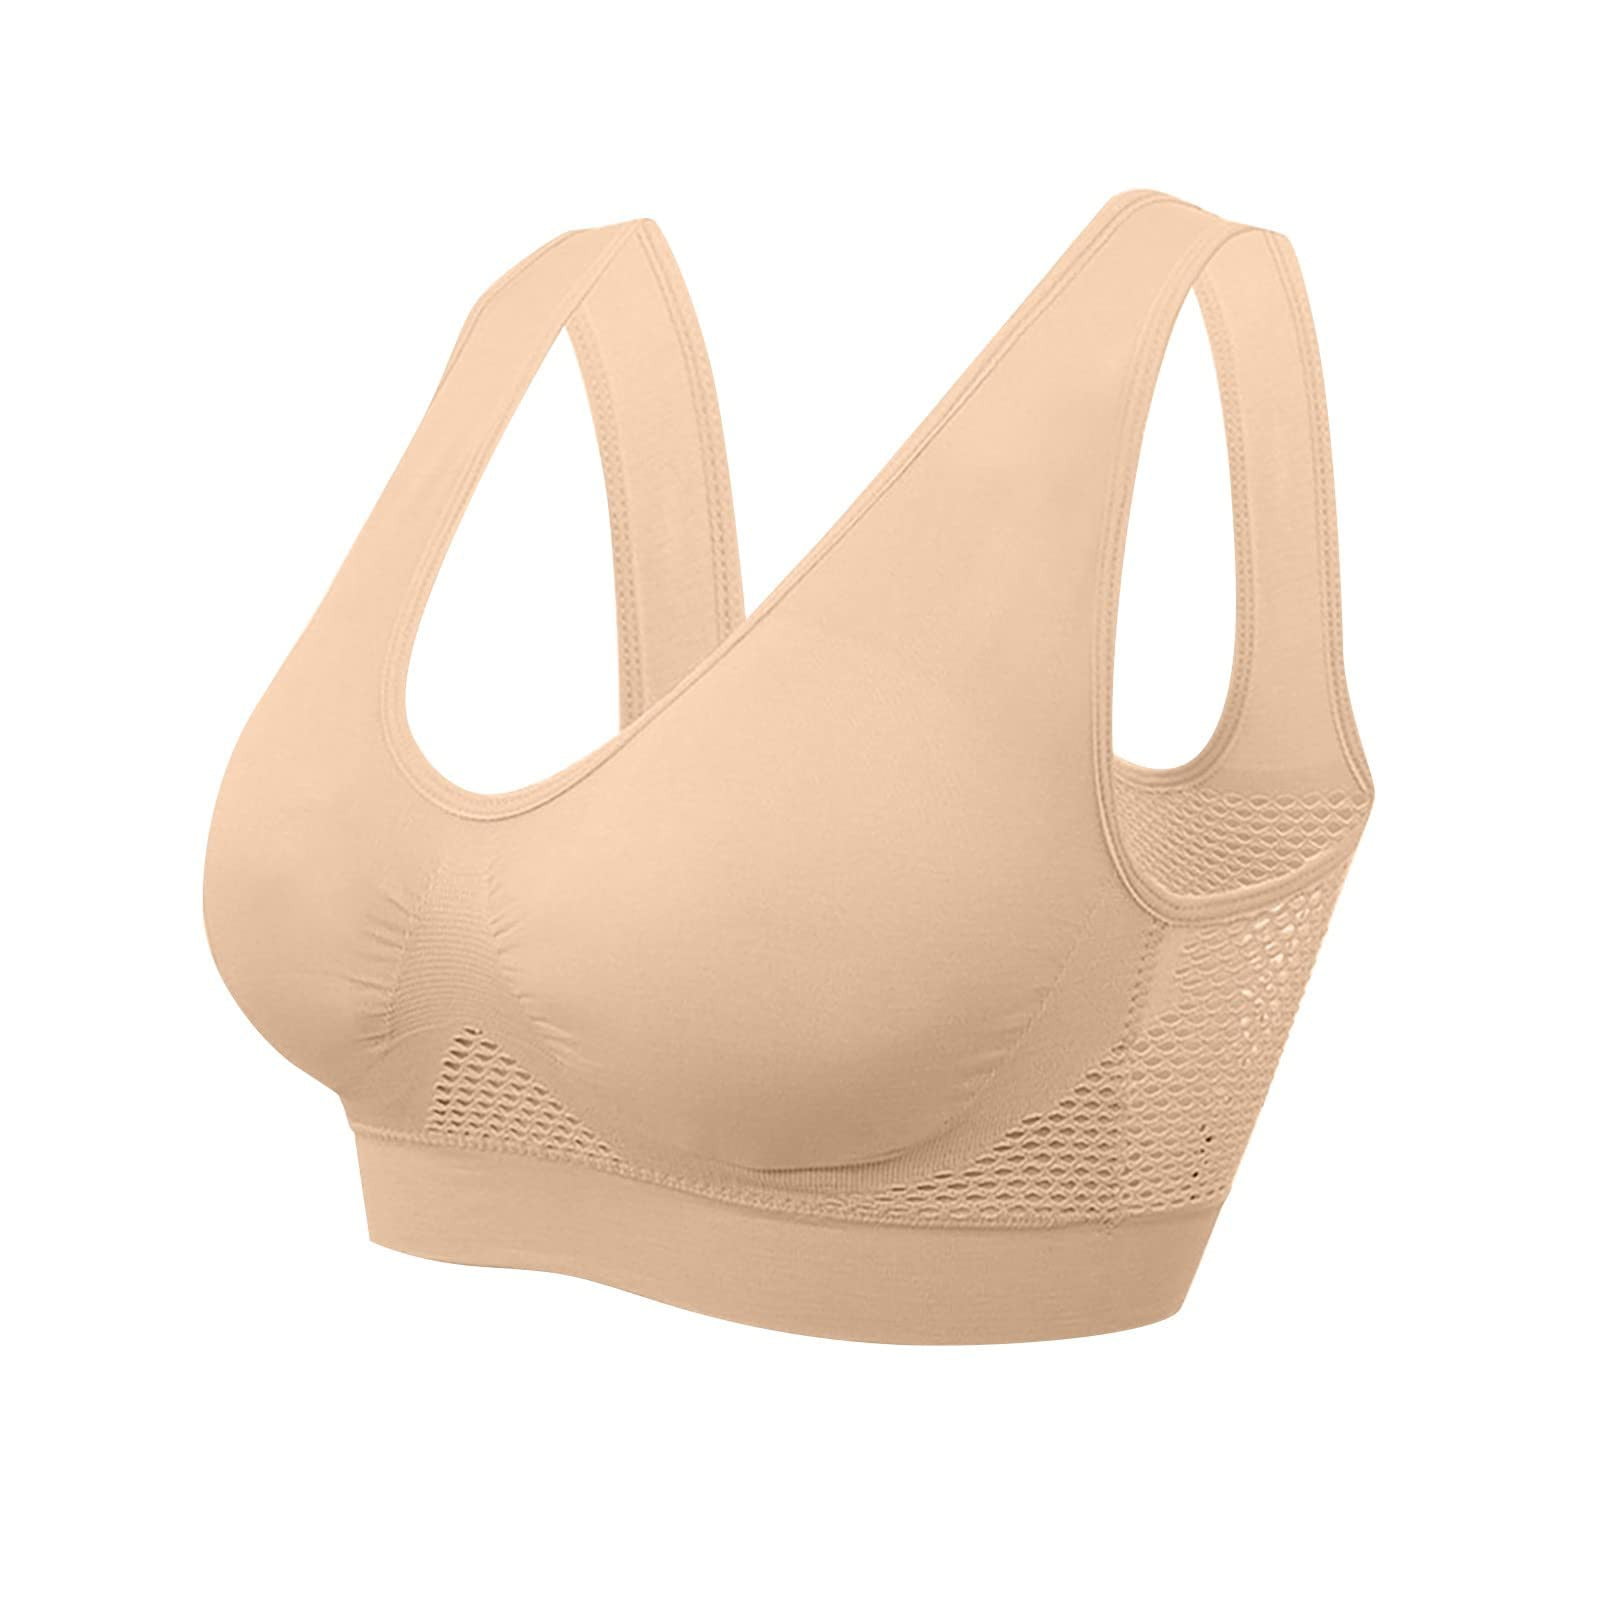 KnoRRS Dotmalls Full Cup Pads Large Size Breathable Bras for Ladys